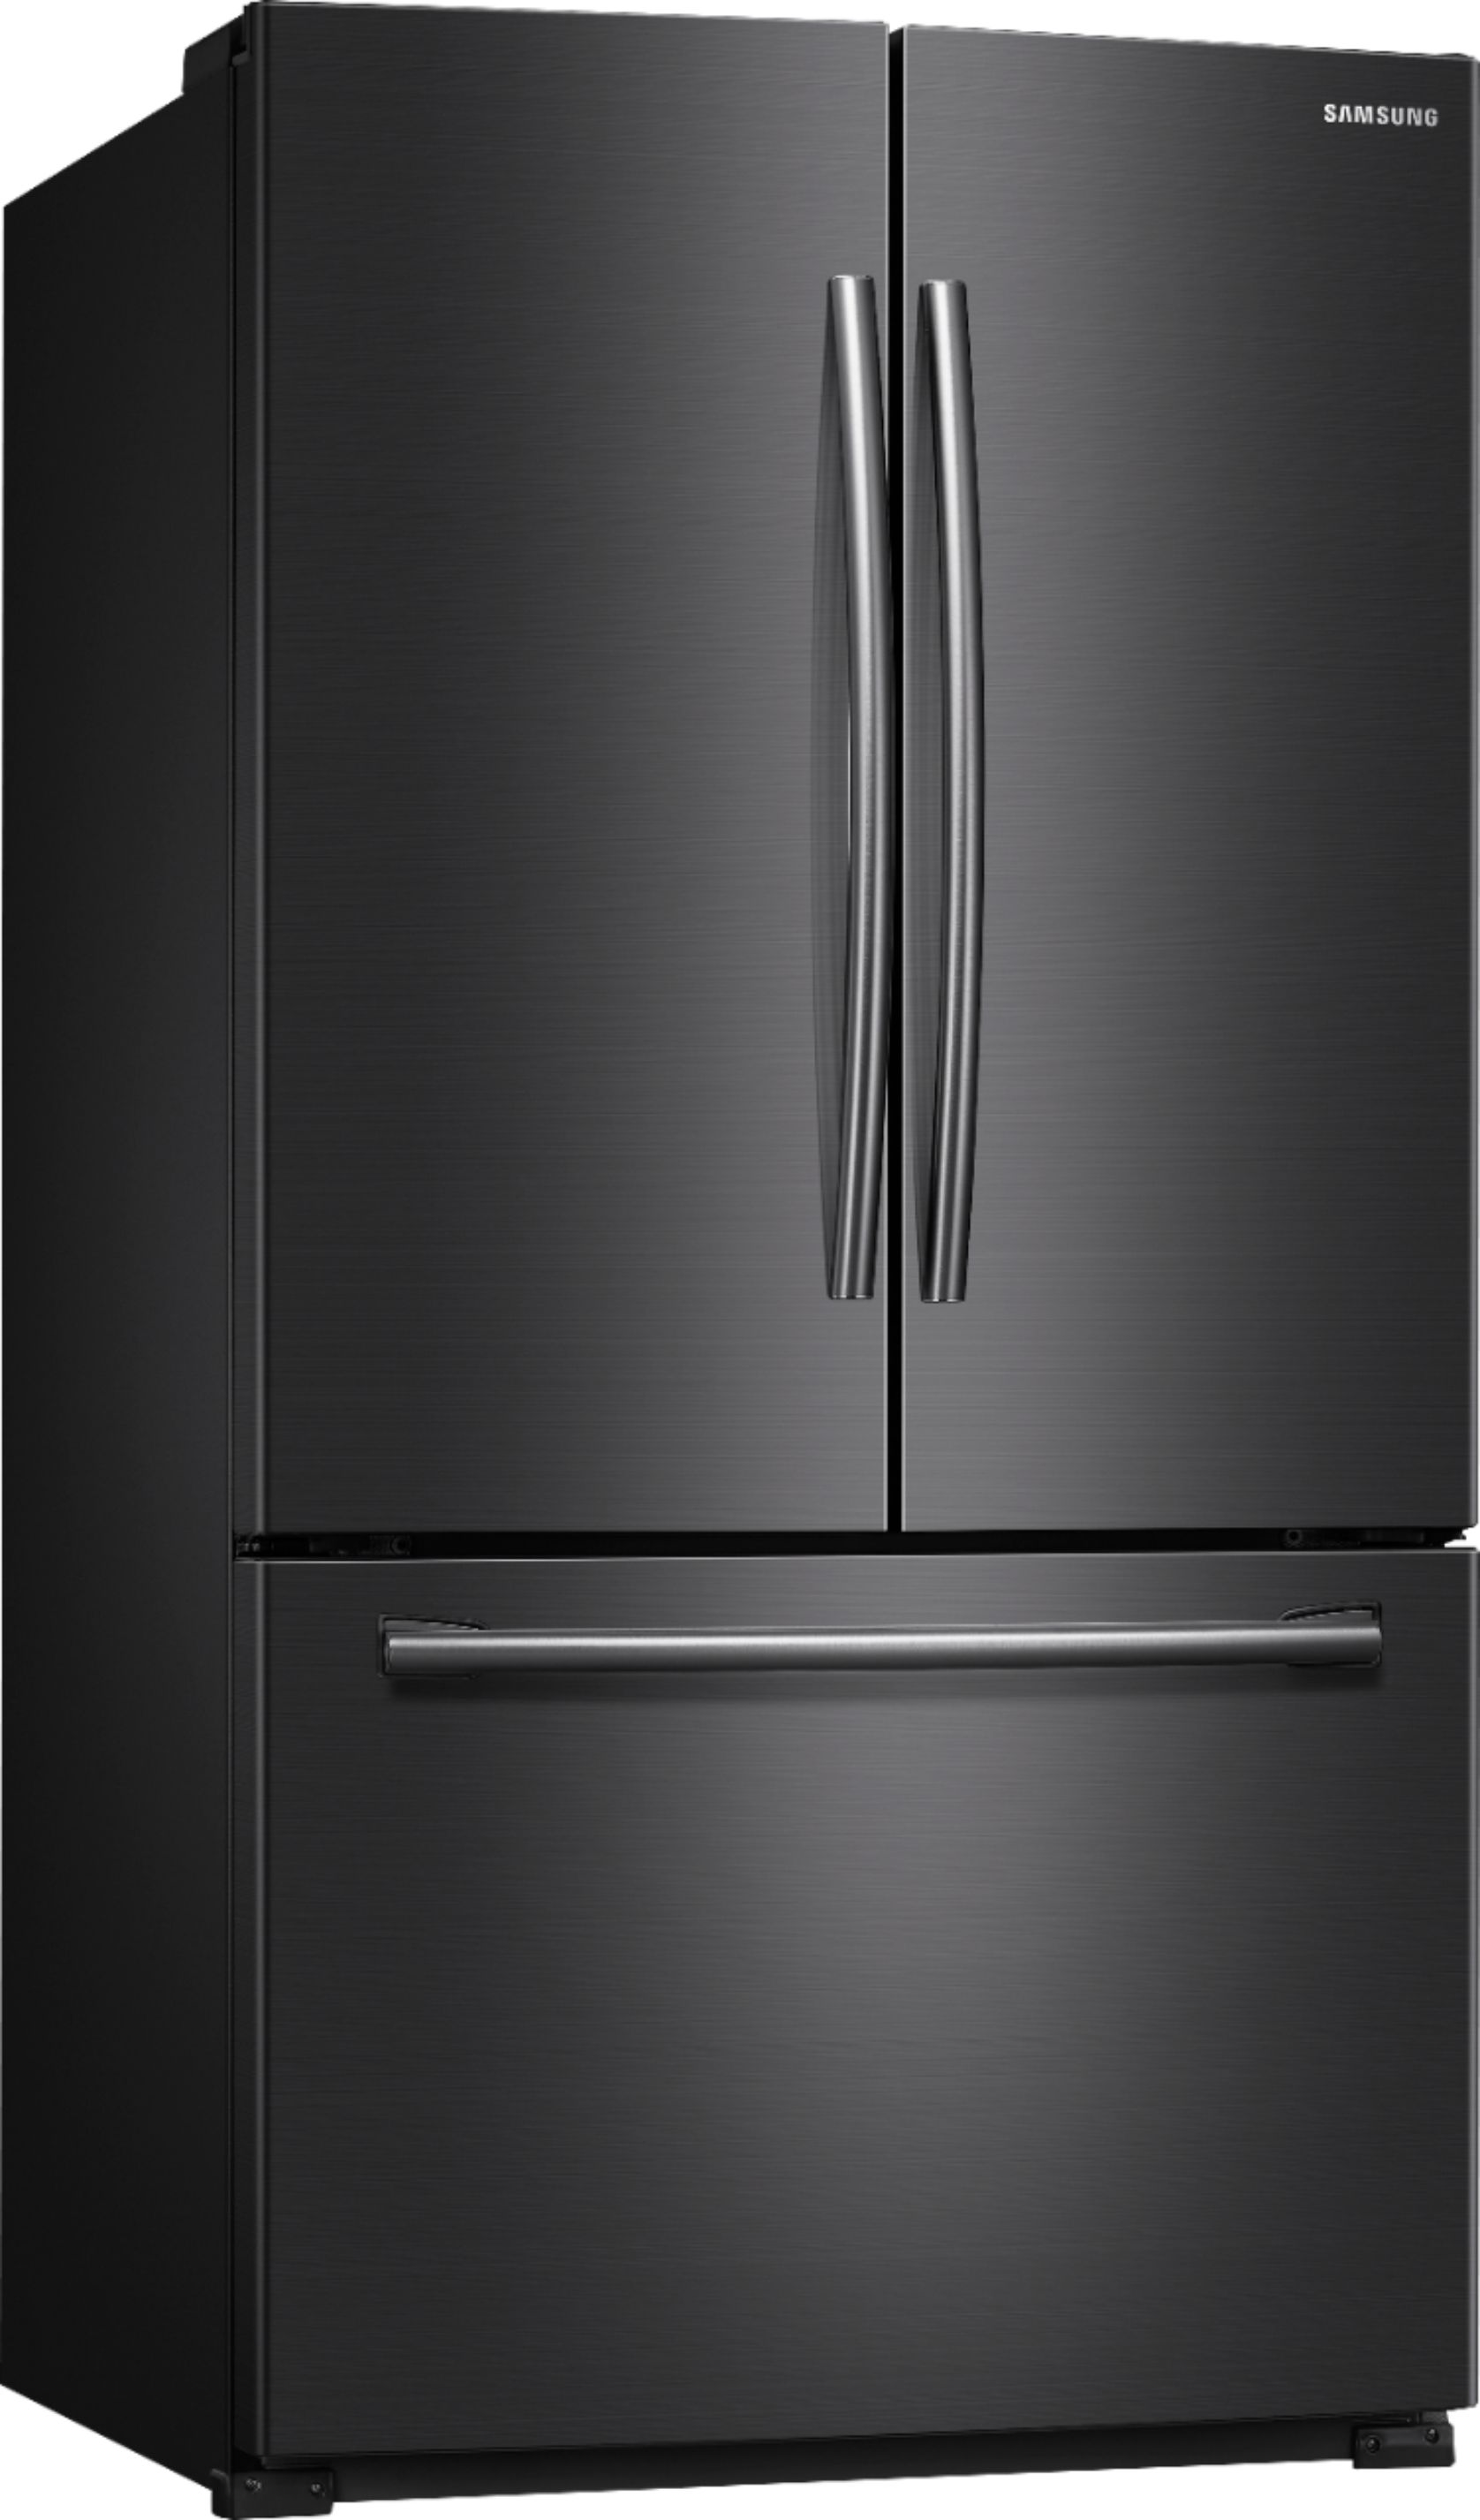 Angle View: Samsung - 25.5 Cu. Ft. French Door Fingerprint Resistant Refrigerator - Black Stainless Steel